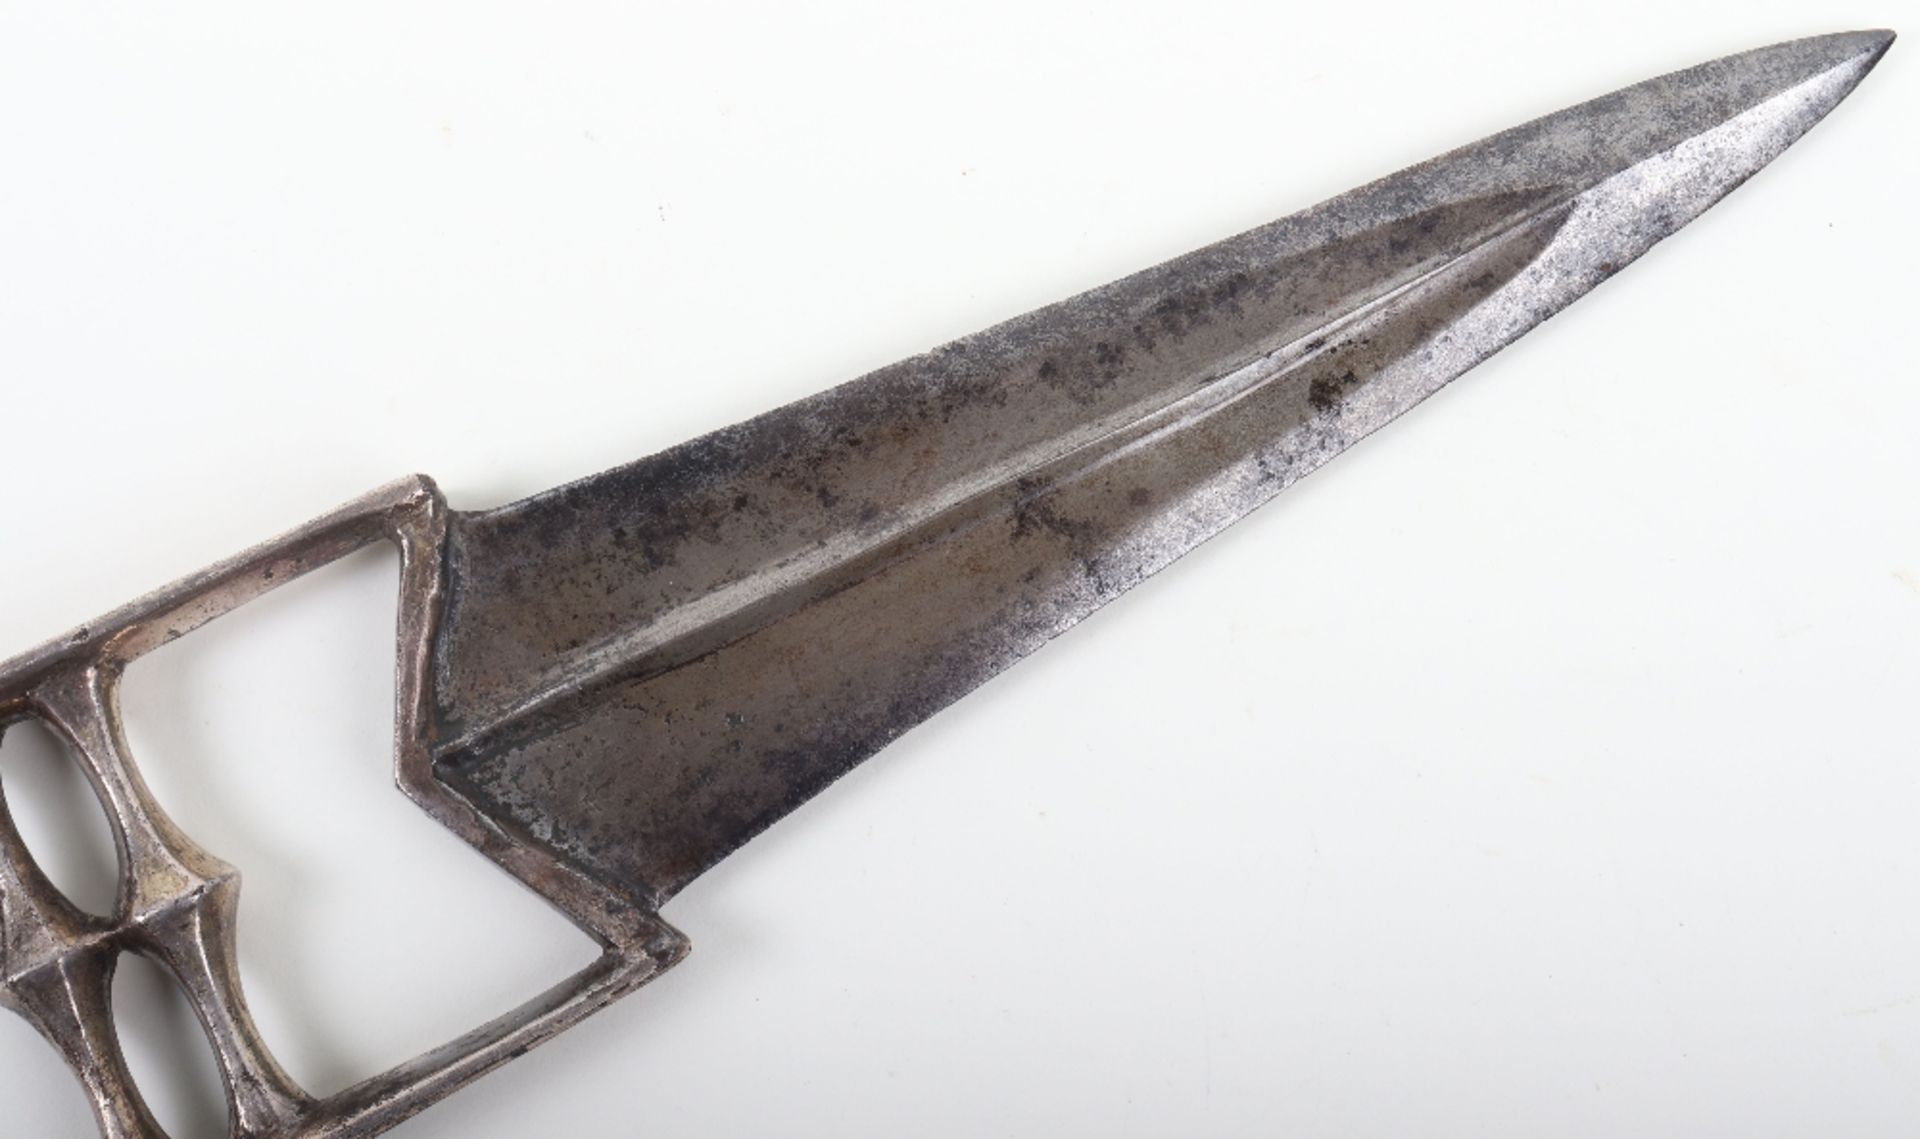 Indian Dagger Katar, Probably Late 17th or Early 18th Century - Image 9 of 9